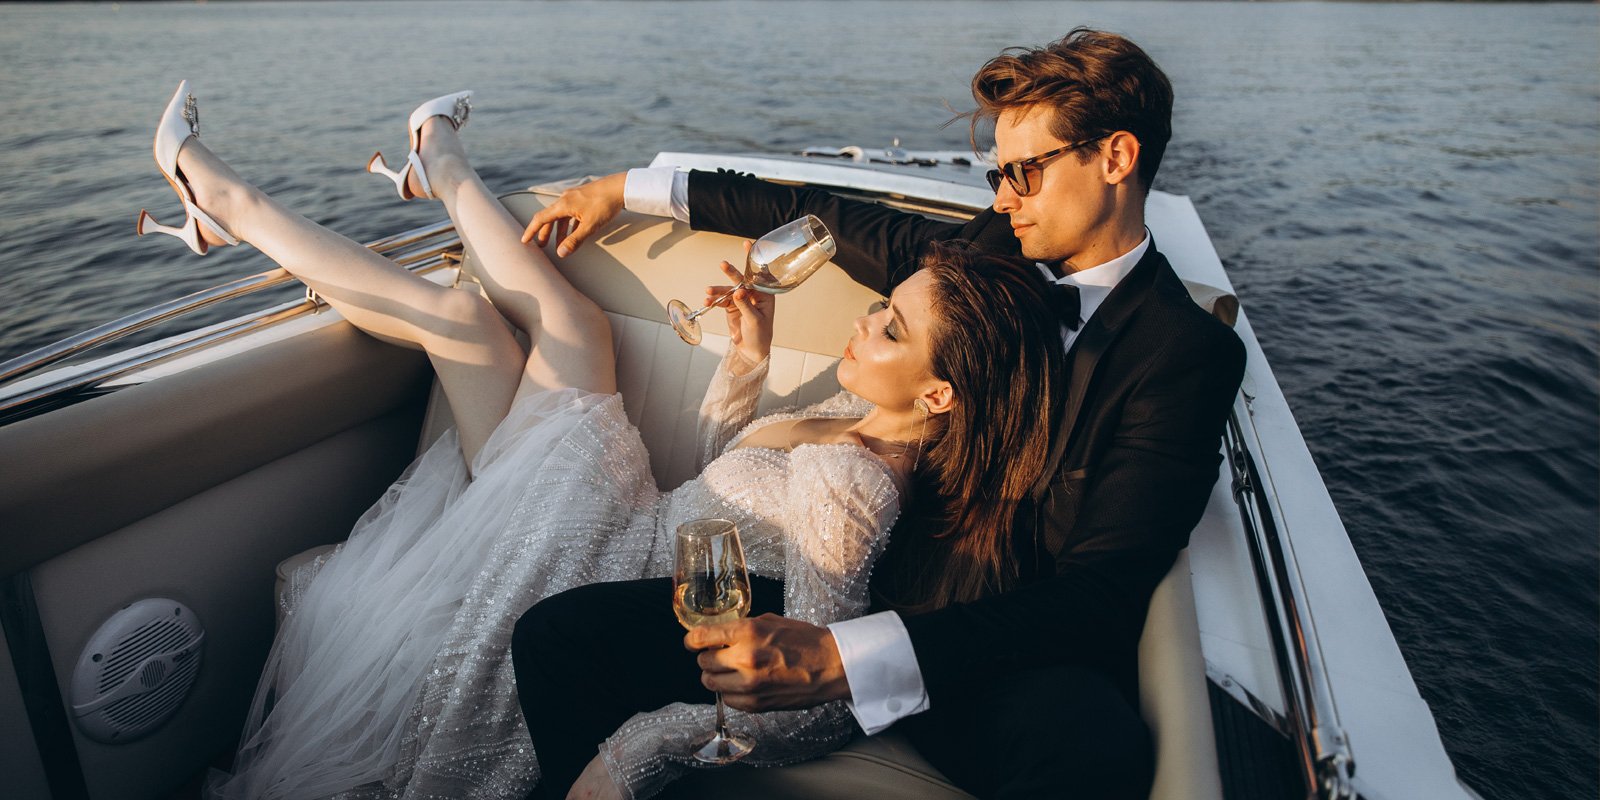 Glamorous man and woman on a boat with glasses of wine